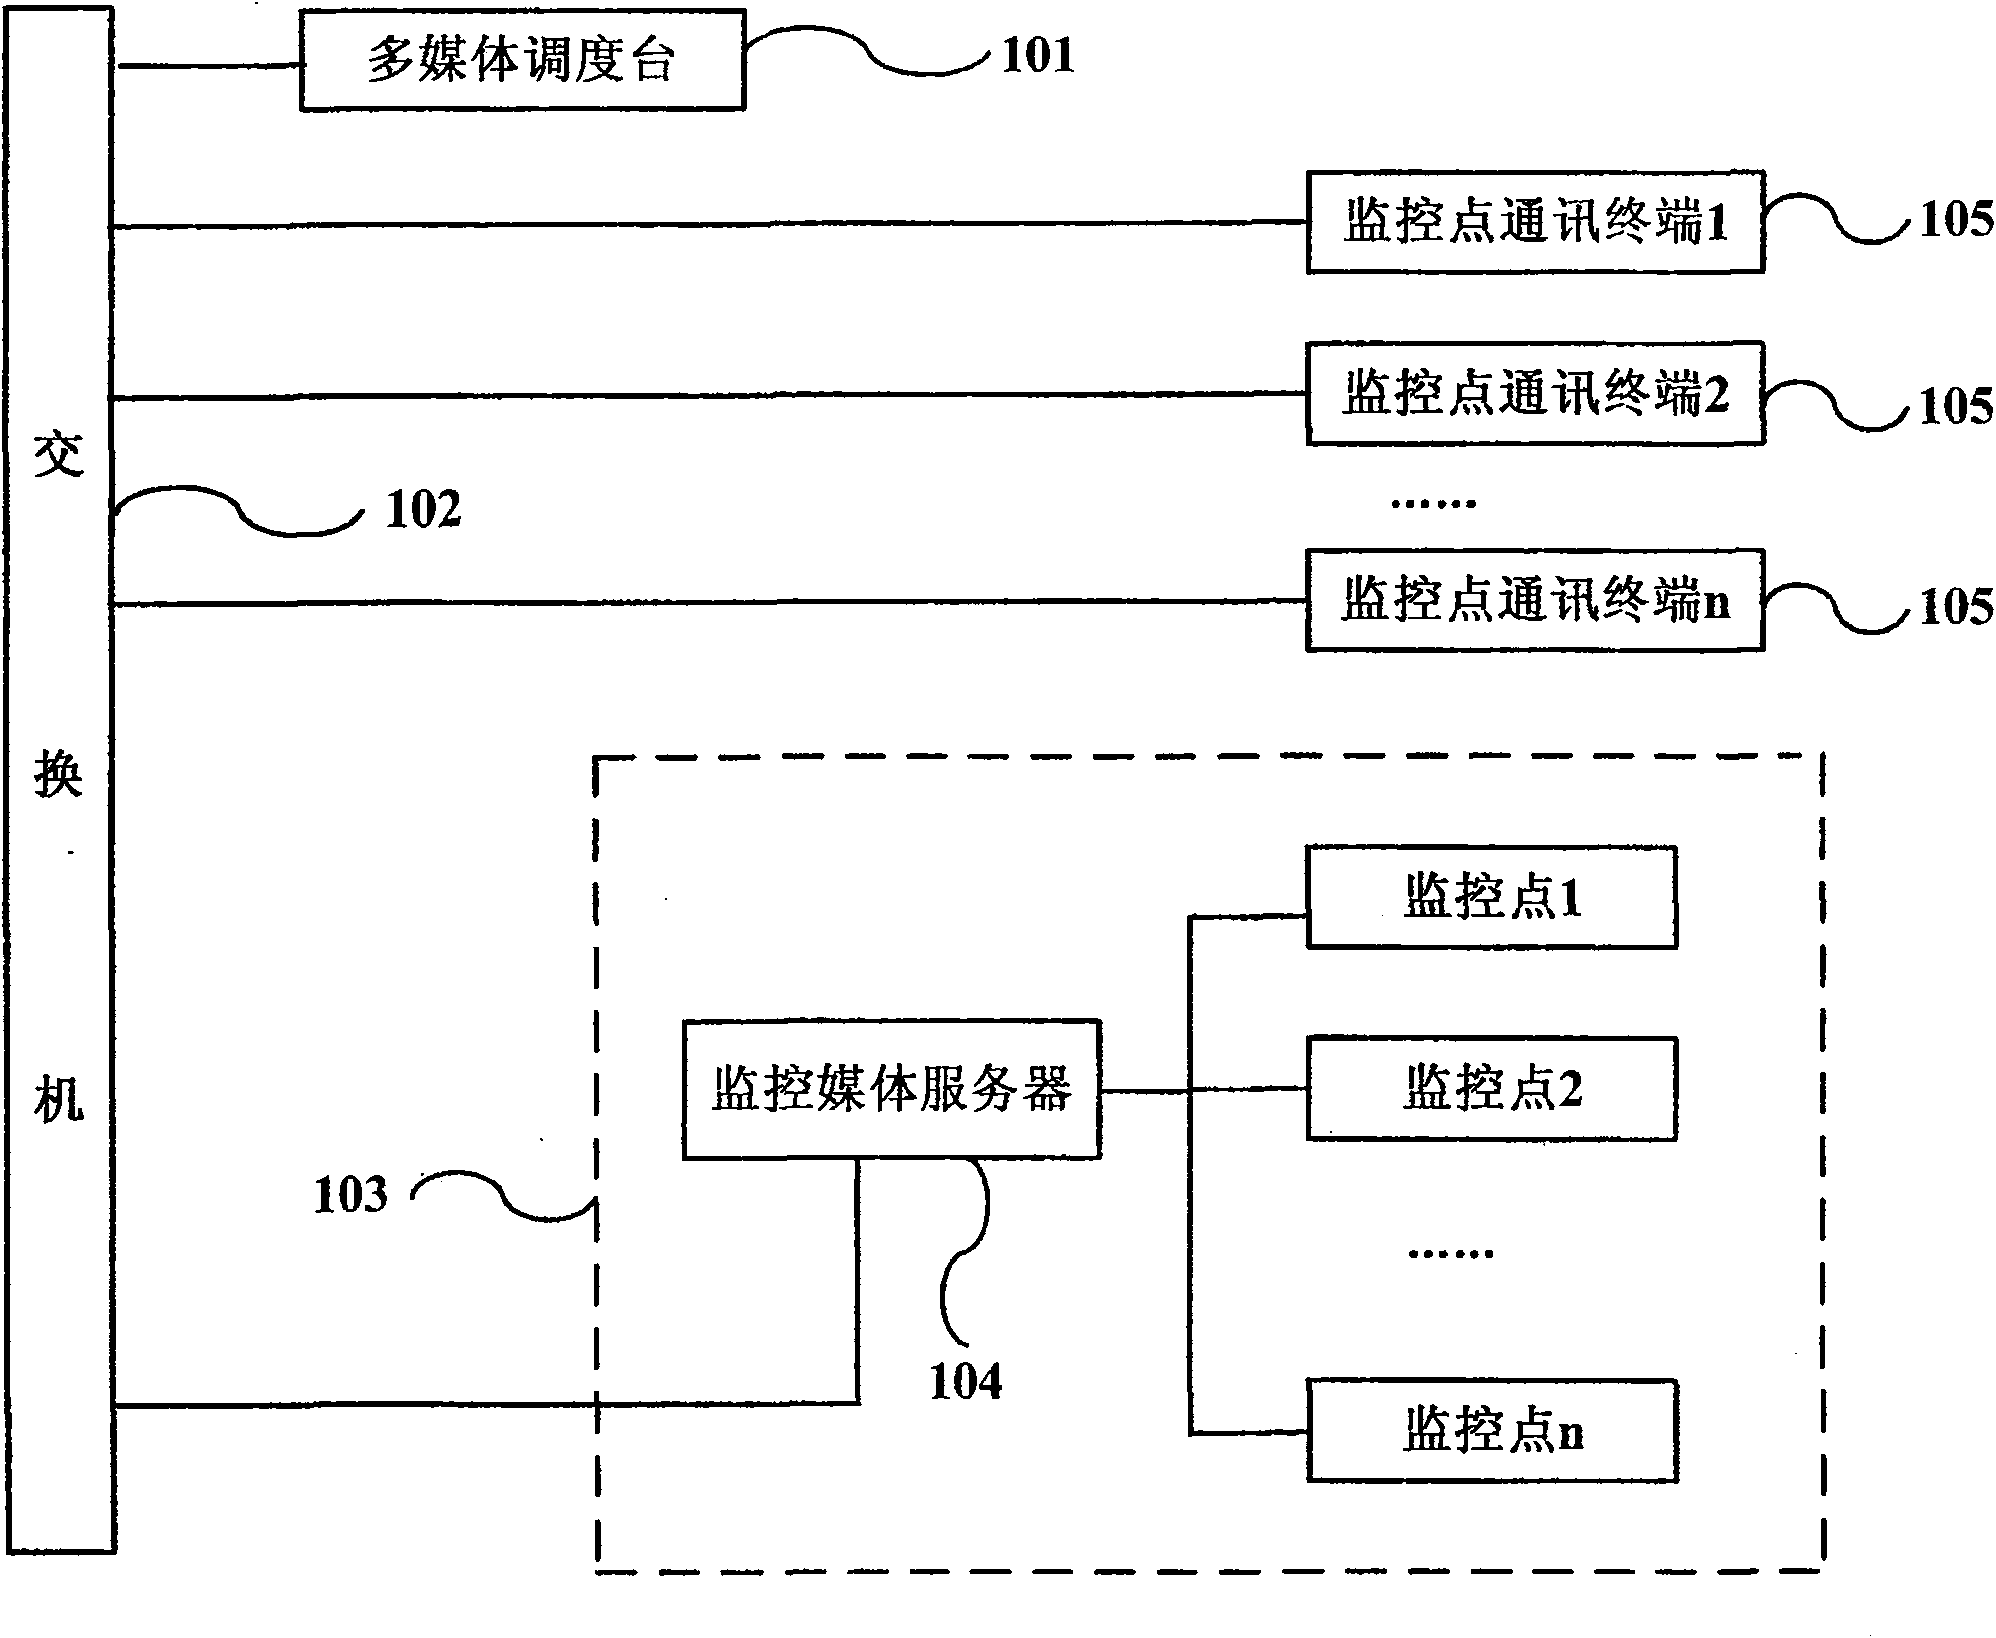 Method for joint command of multimedia scheduling table and monitoring system